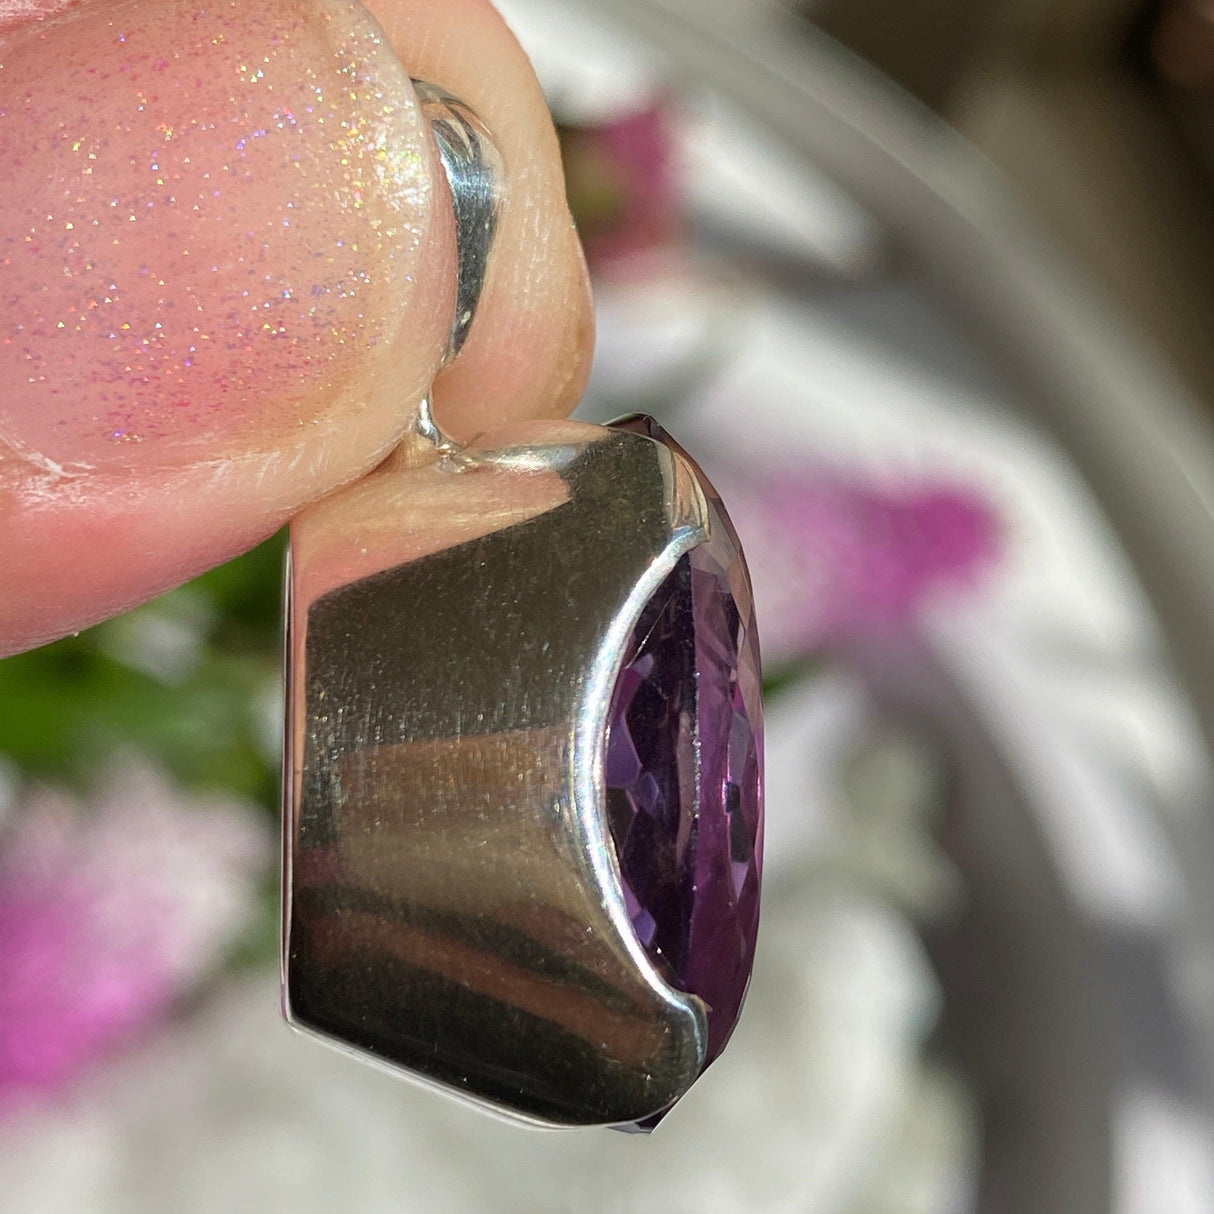 Amethyst faceted oval pendant KPGJ2713 - Nature's Magick